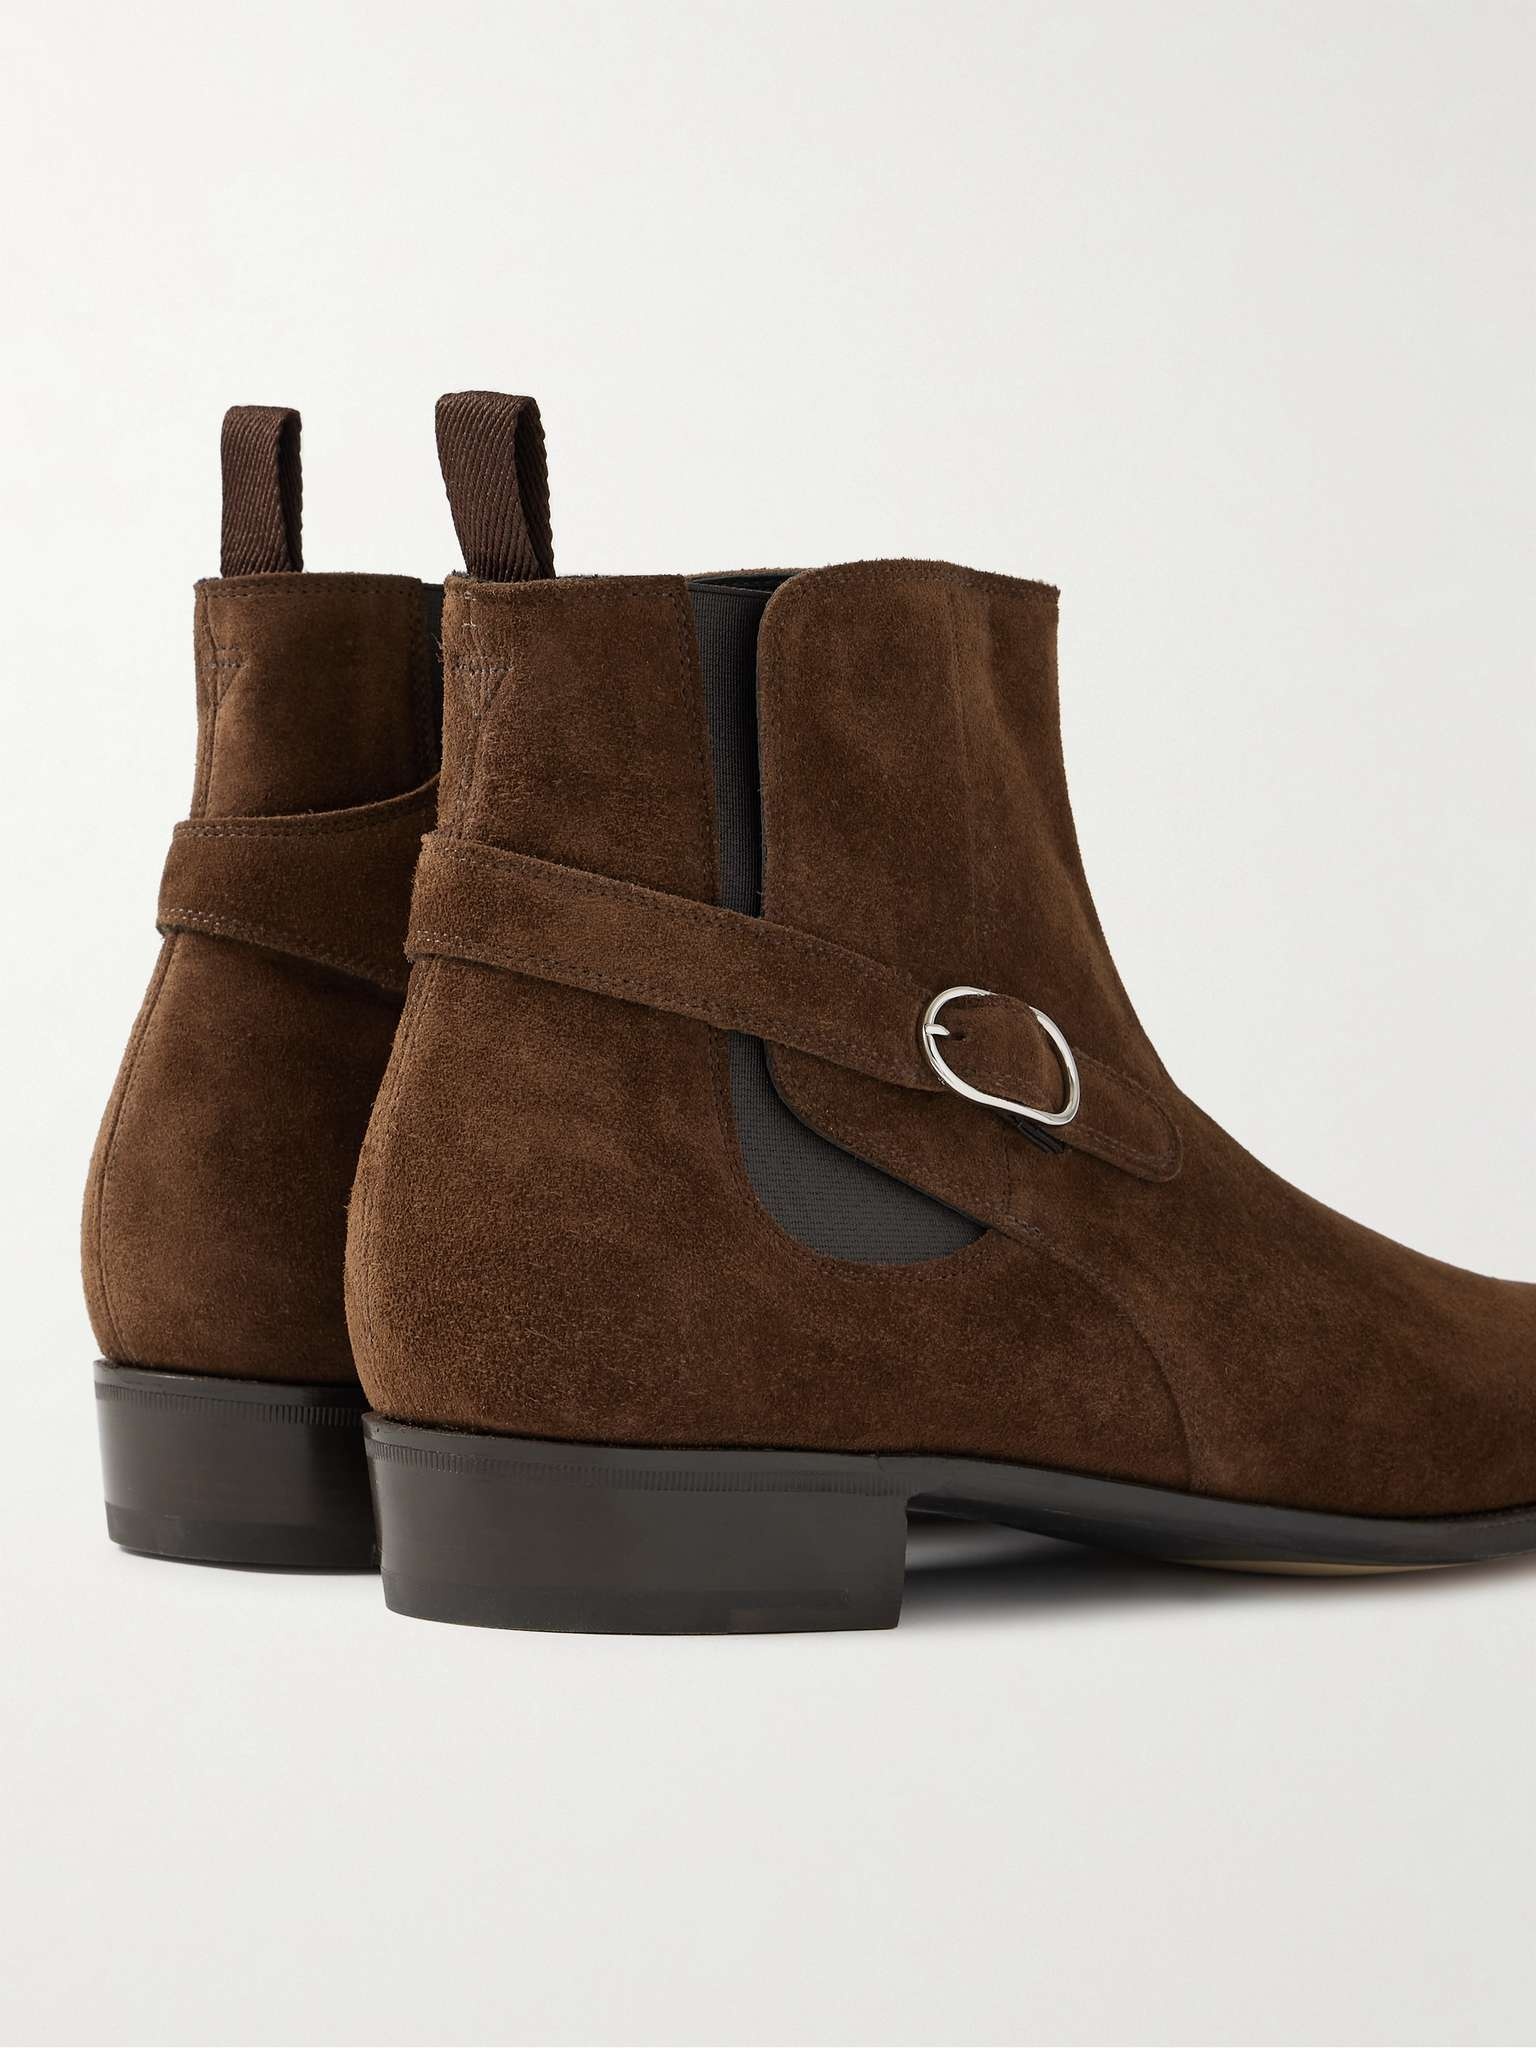 Masons Buckled Suede Chelsea Boots - 5